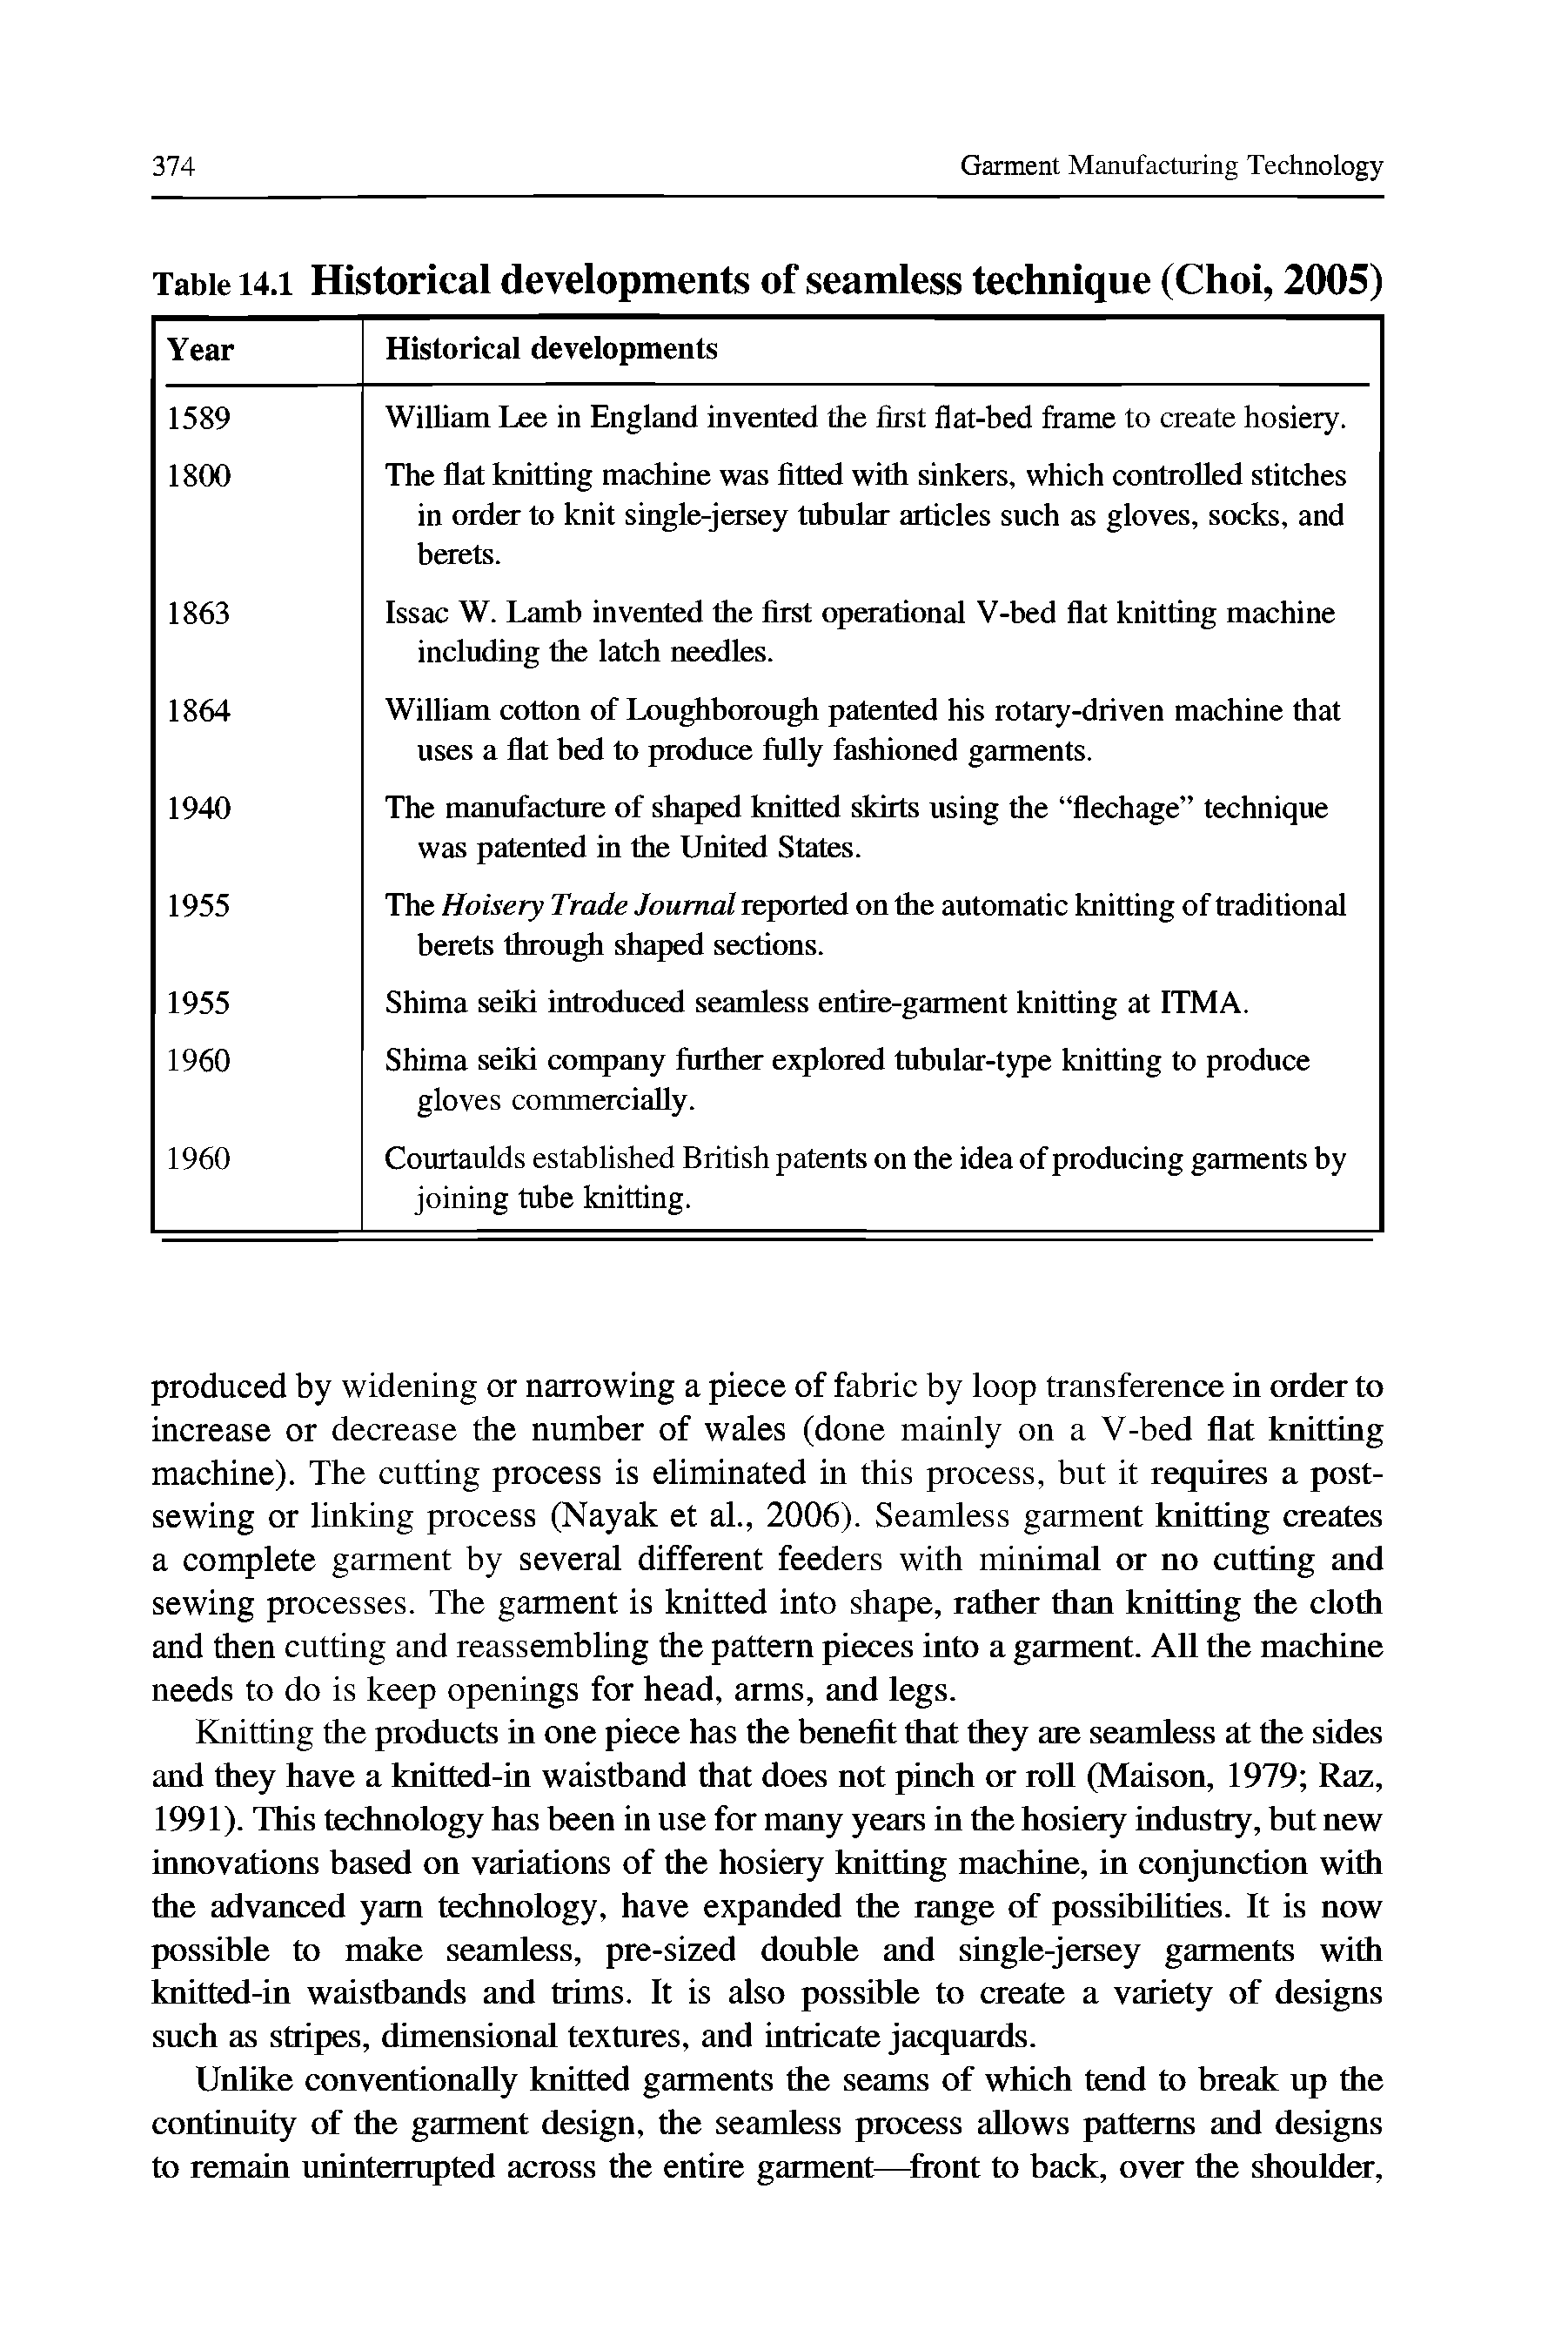 Table 14.1 Historical developments of seamless technique (Choi, 2005)...